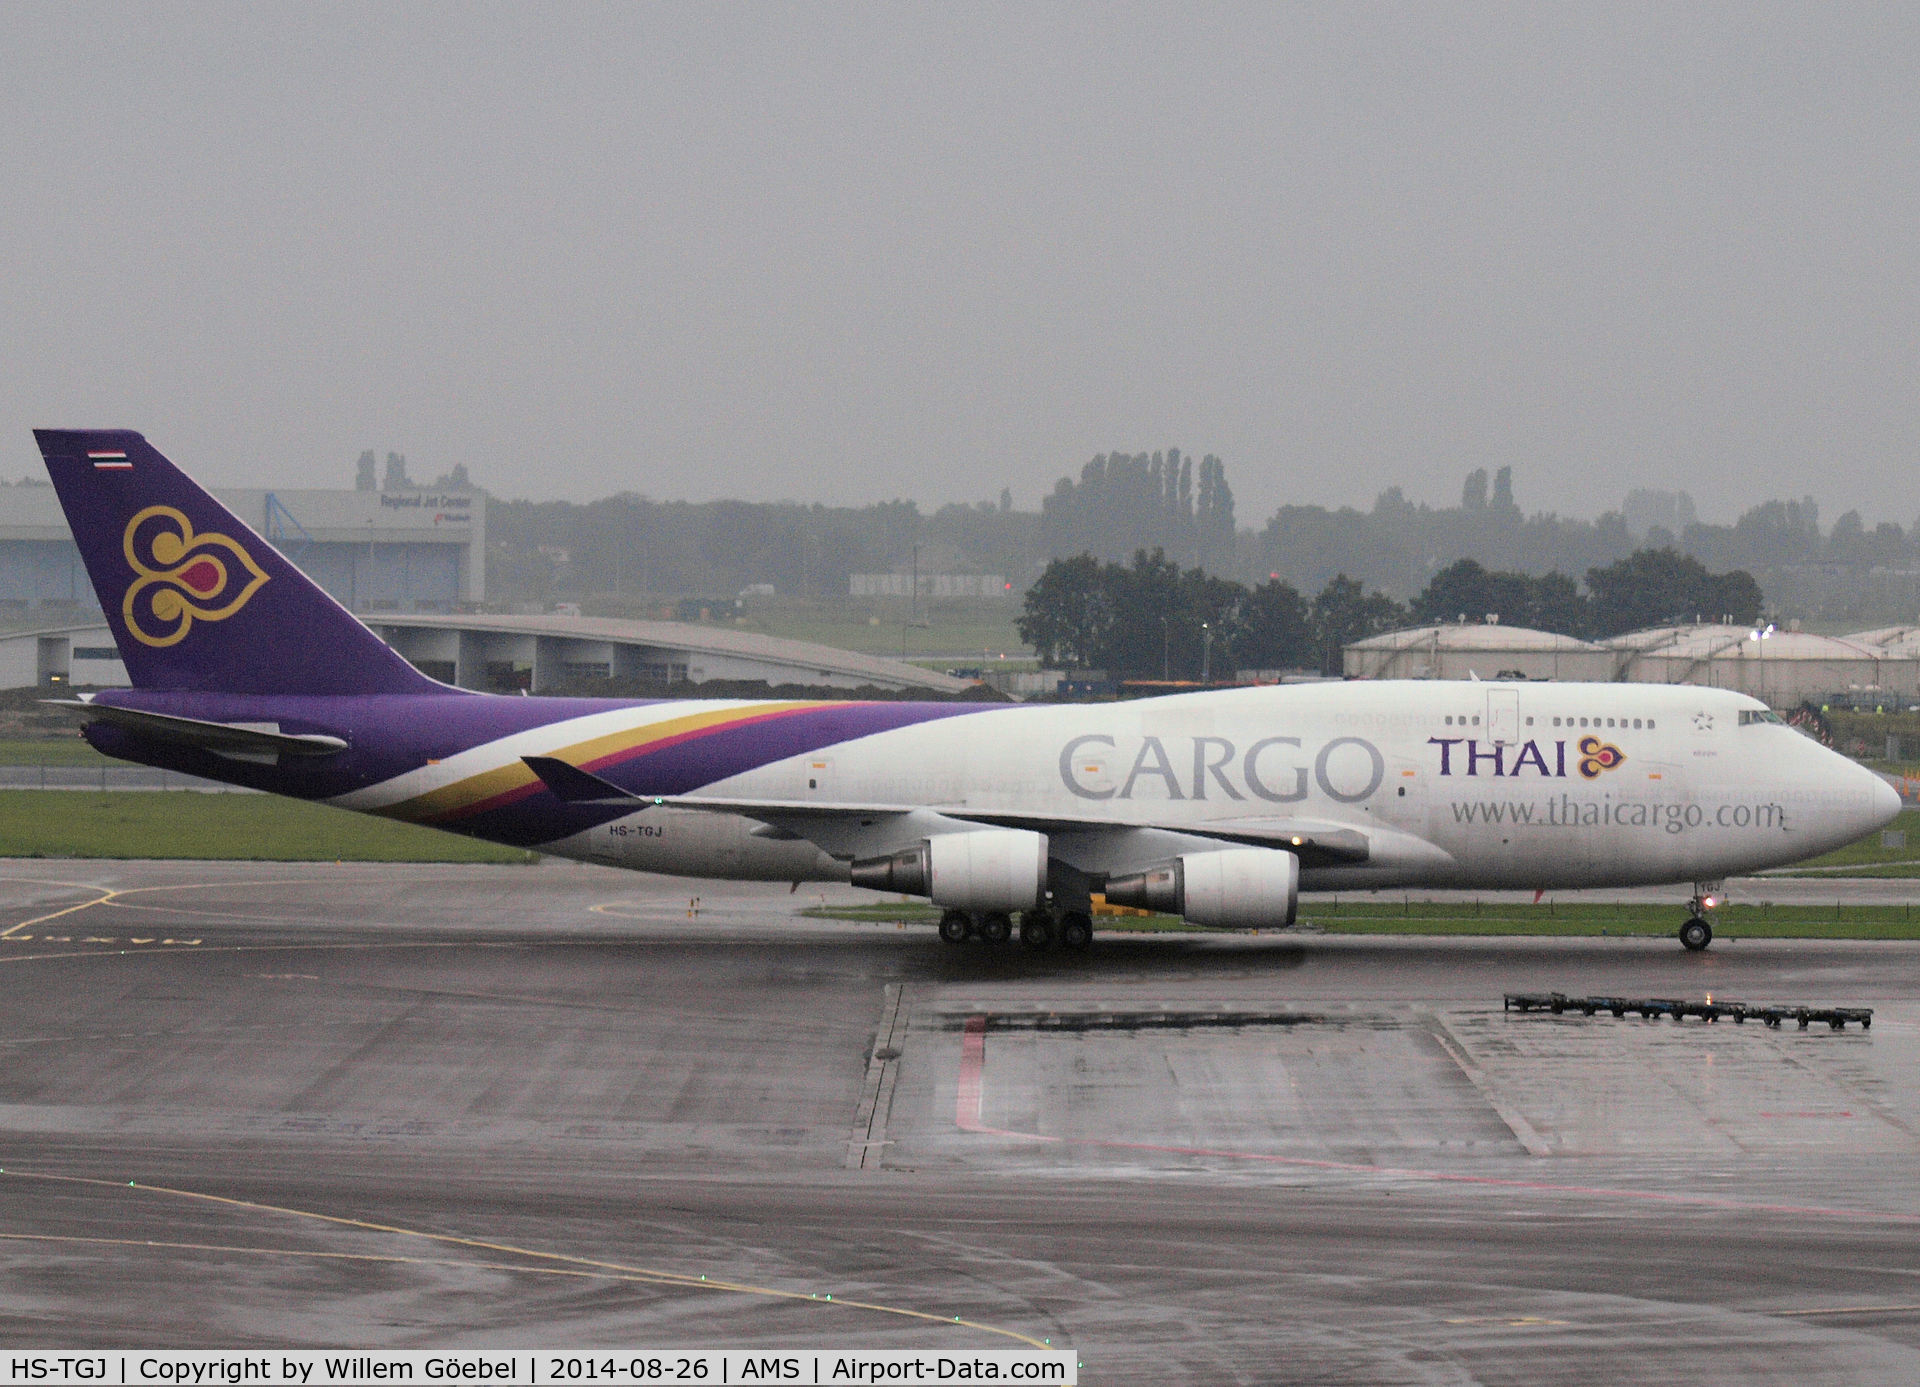 HS-TGJ, 1990 Boeing 747-4D7 C/N 24459, Taxi to the Cargo place